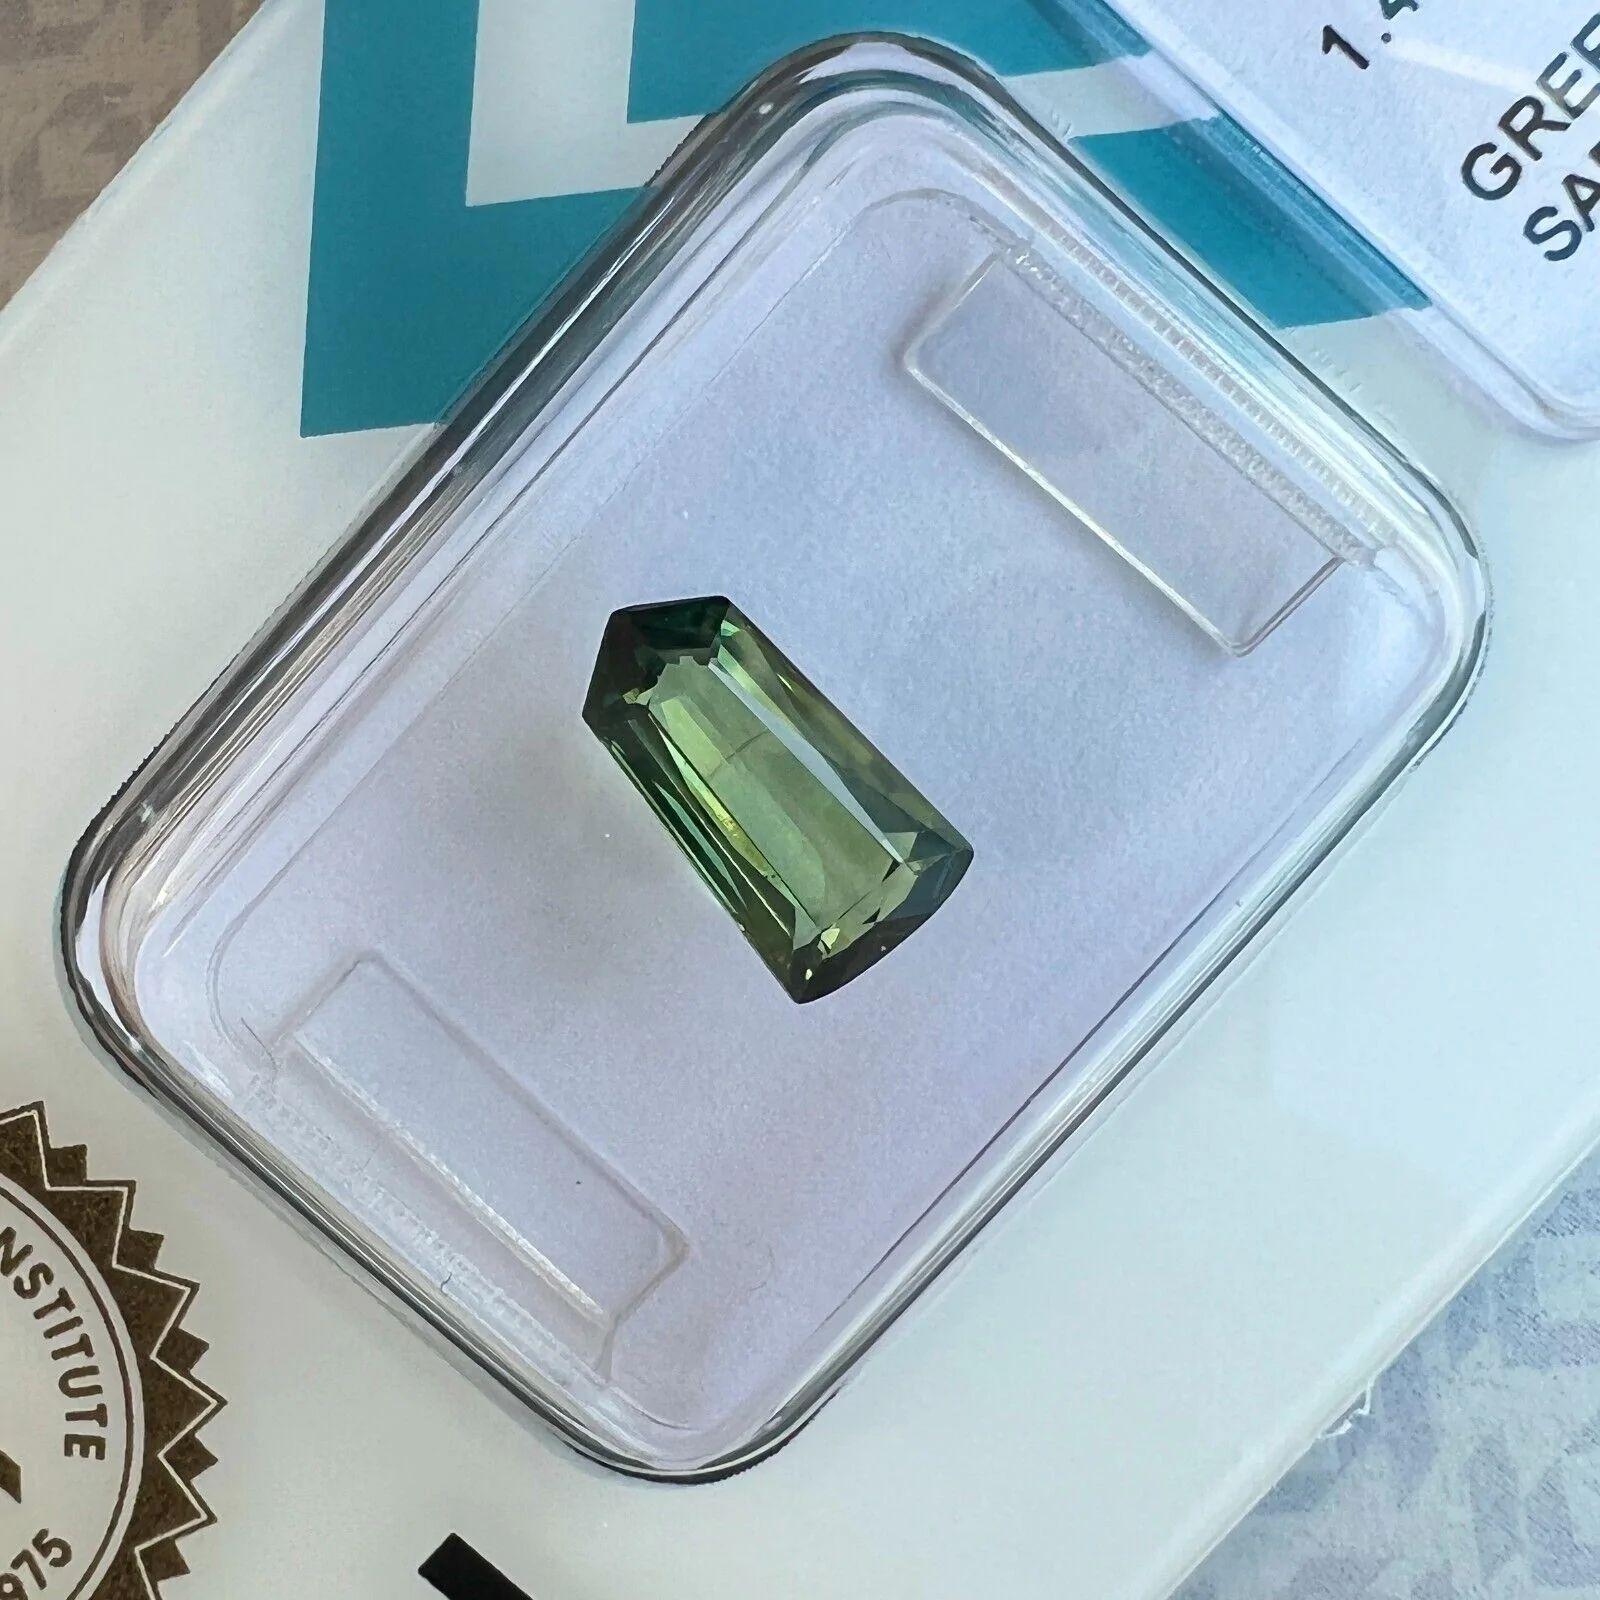 1.41ct Unique IGI Blue Yellow Green Sapphire Untreated Fancy Pentagon Cut Gem

Unique Untreated Bluish Yellowish Green Sapphire In IGI Blister.
1.41 Carat with an excellent fancy pentagon cut and totally untreated/unheated which is very rare for